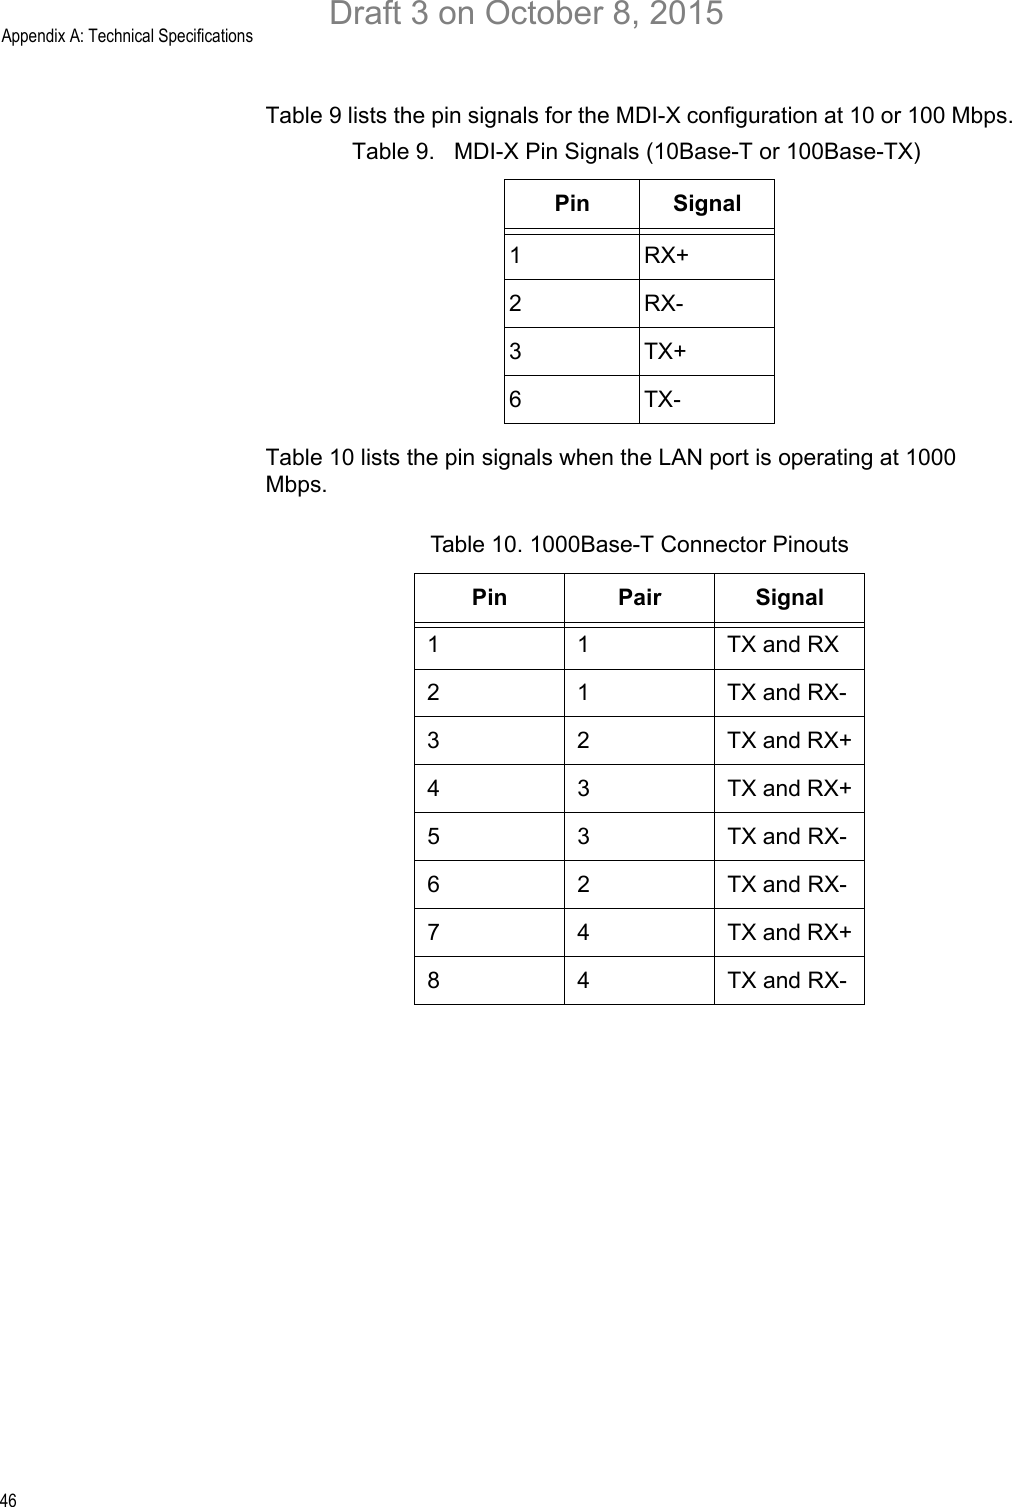 Appendix A: Technical Specifications46Table 9 lists the pin signals for the MDI-X configuration at 10 or 100 Mbps.Table 10 lists the pin signals when the LAN port is operating at 1000 Mbps.Table 9.   MDI-X Pin Signals (10Base-T or 100Base-TX)Pin Signal1RX+2RX-3TX+6TX-Table 10. 1000Base-T Connector PinoutsPin Pair Signal1 1 TX and RX2 1 TX and RX-32TX and RX+43TX and RX+5 3 TX and RX-6 2 TX and RX-74TX and RX+8 4 TX and RX-Draft 3 on October 8, 2015